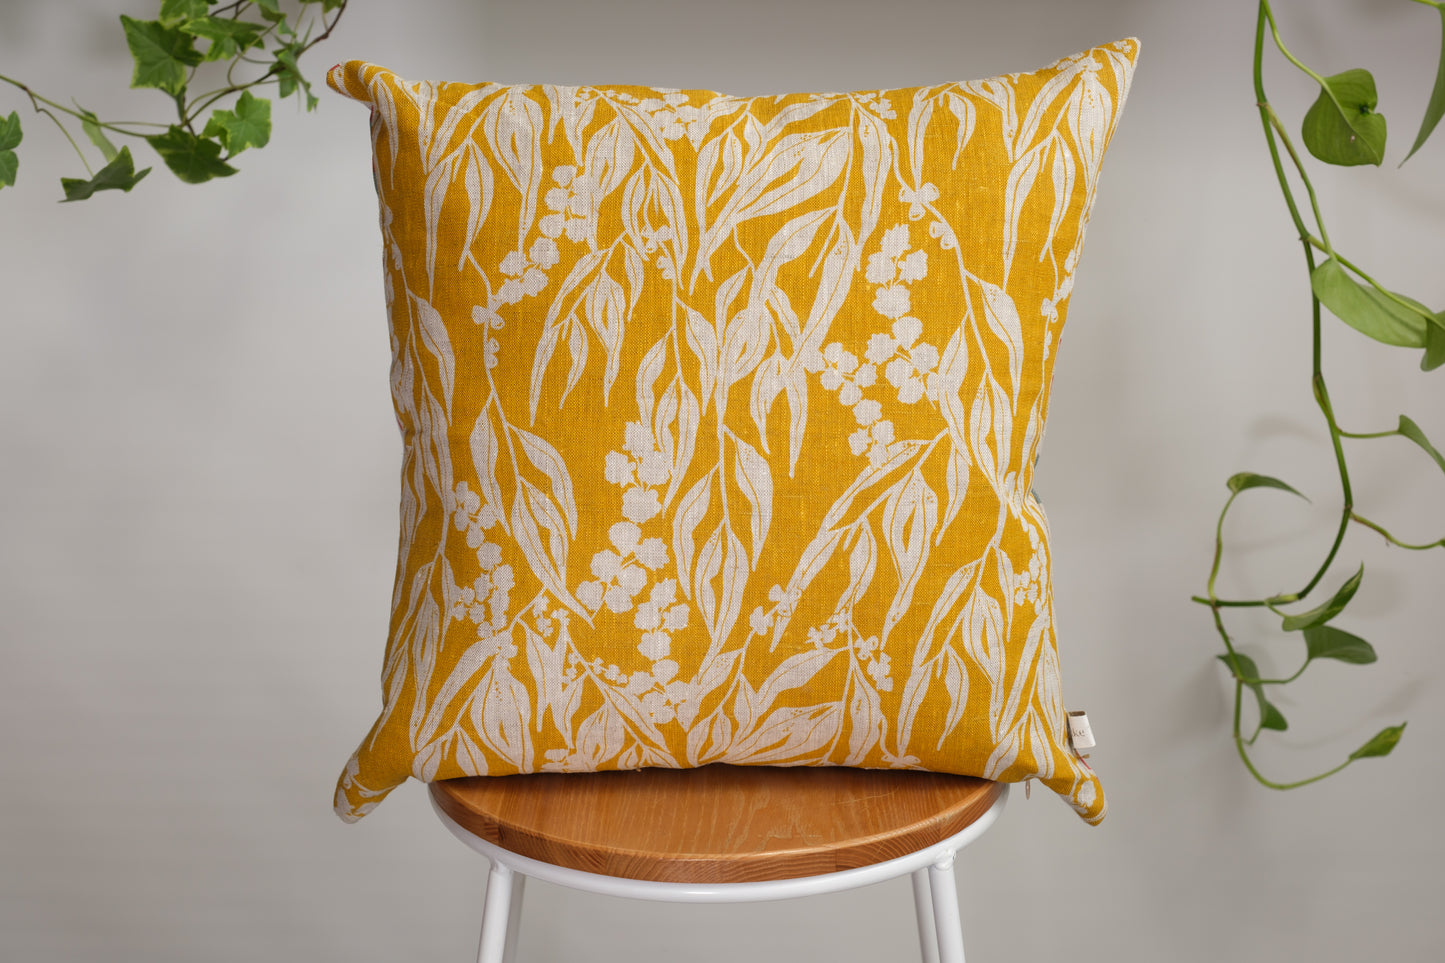 Linen cushion cover featuring hand screen printed wattle sprigs and nuts about wattle. Designed and made by Femke Textiles